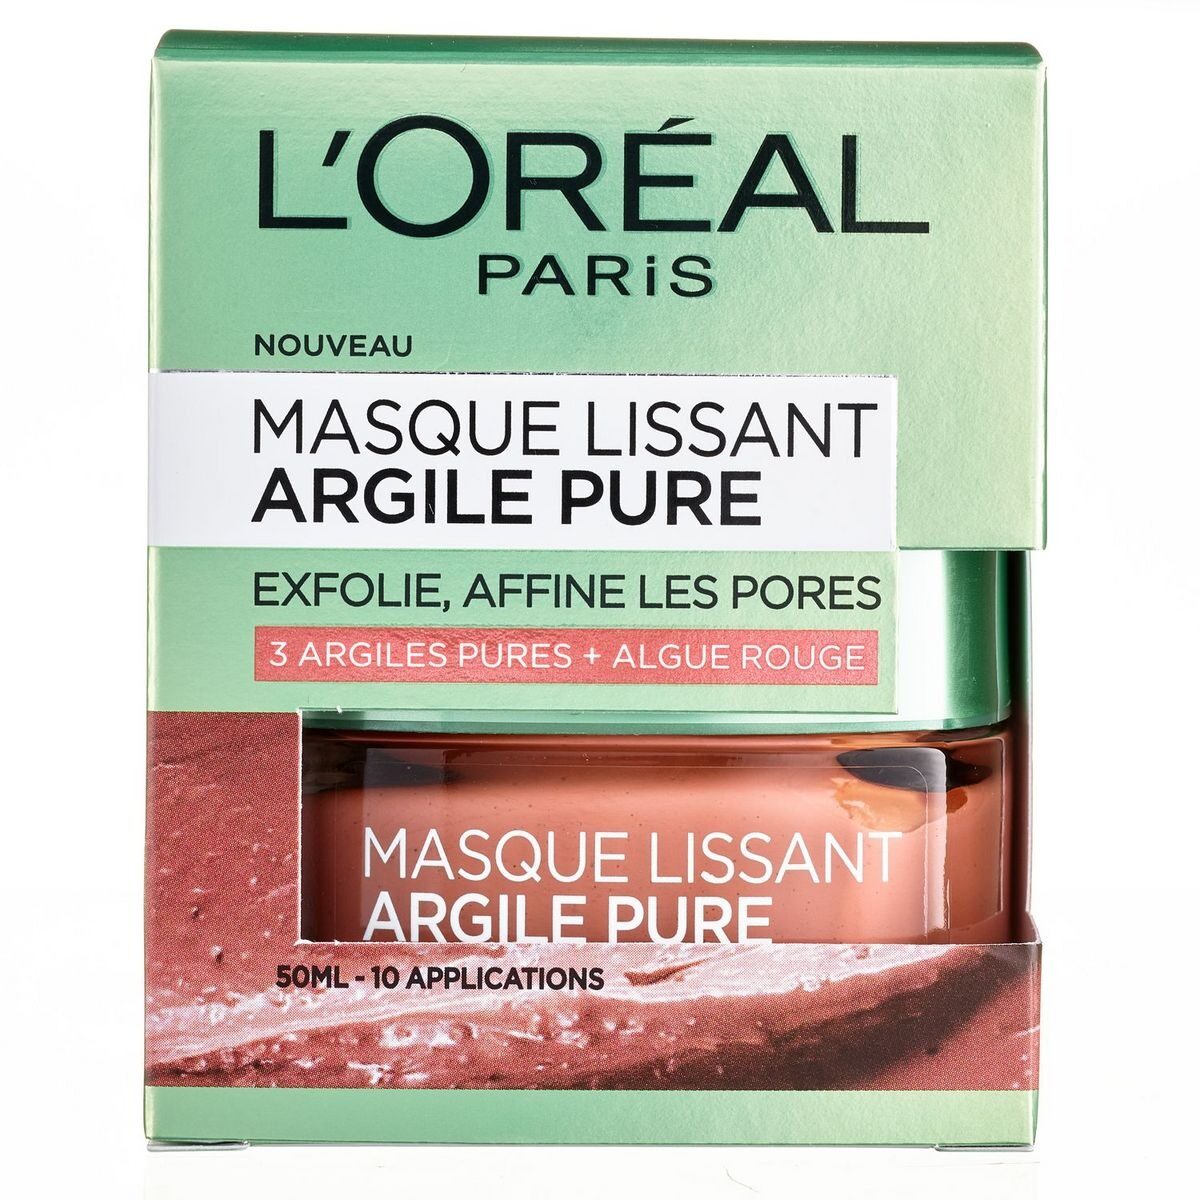 Masque lissant - Product - fr